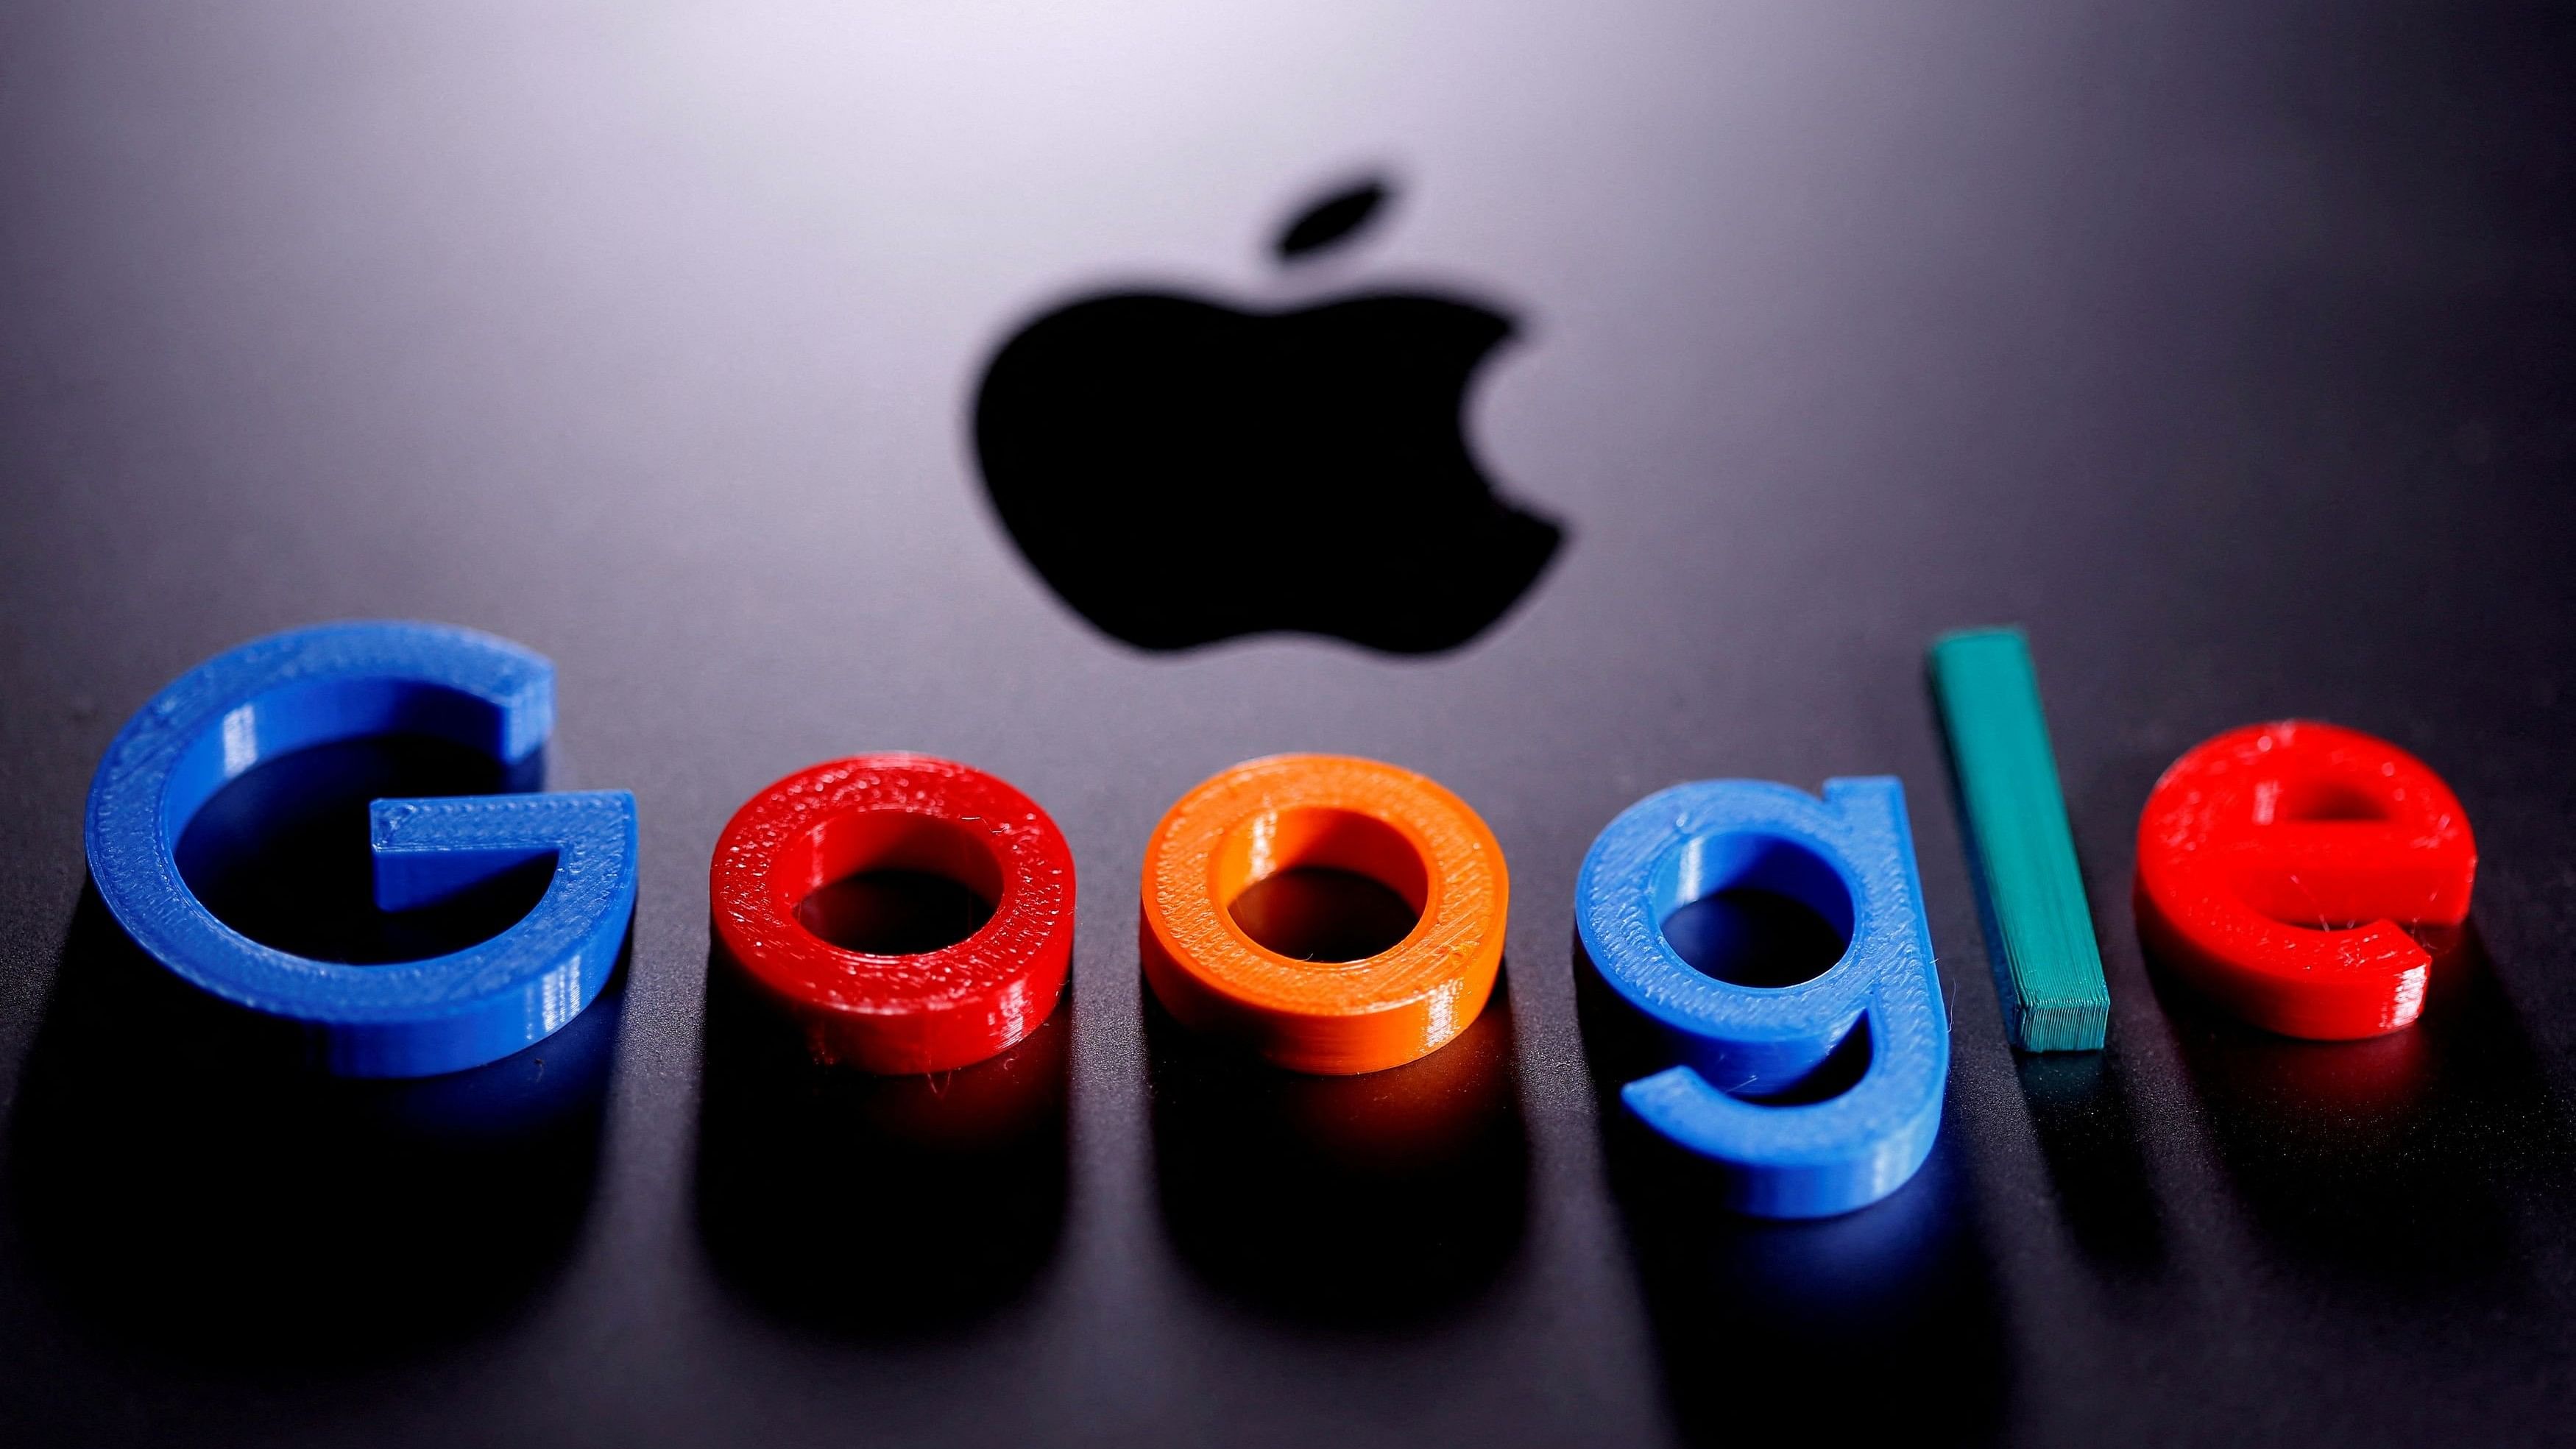 <div class="paragraphs"><p> A 3D printed Google logo is placed on the Apple Macbook in this illustration.</p></div>